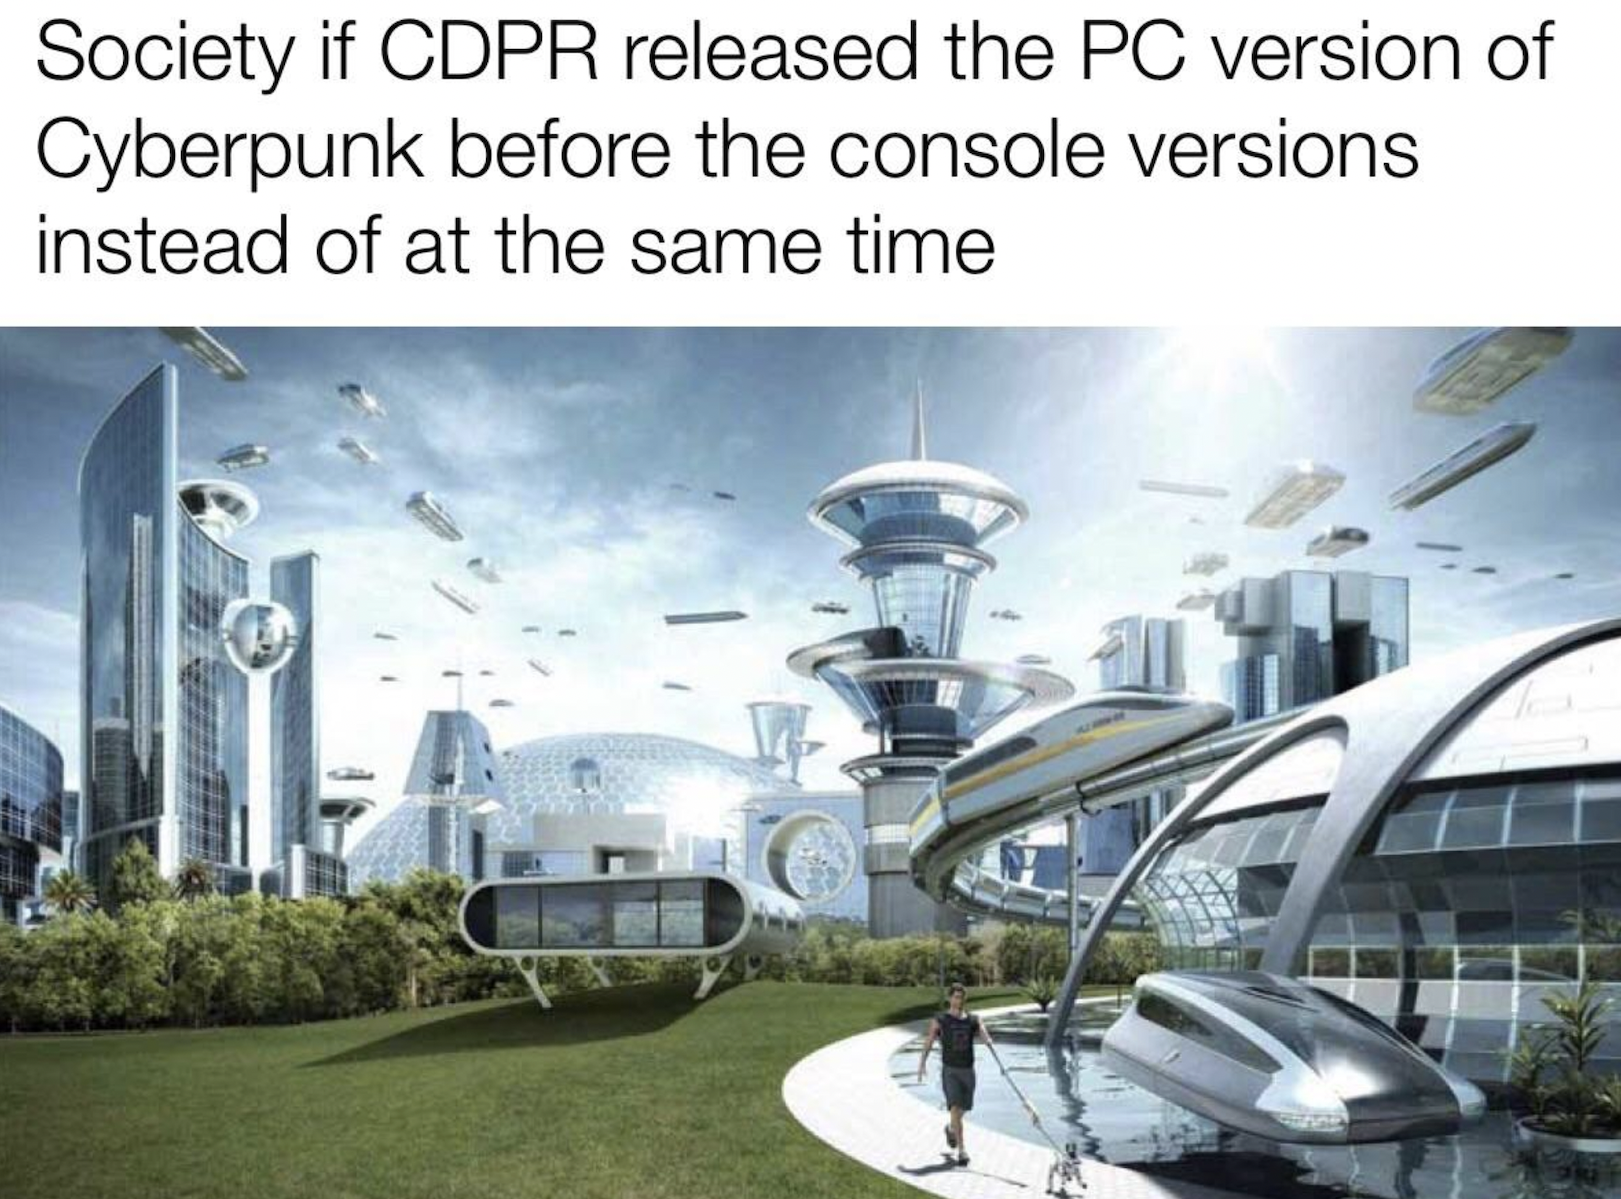 PC Gaming Memes - society if twitter didn t exist -